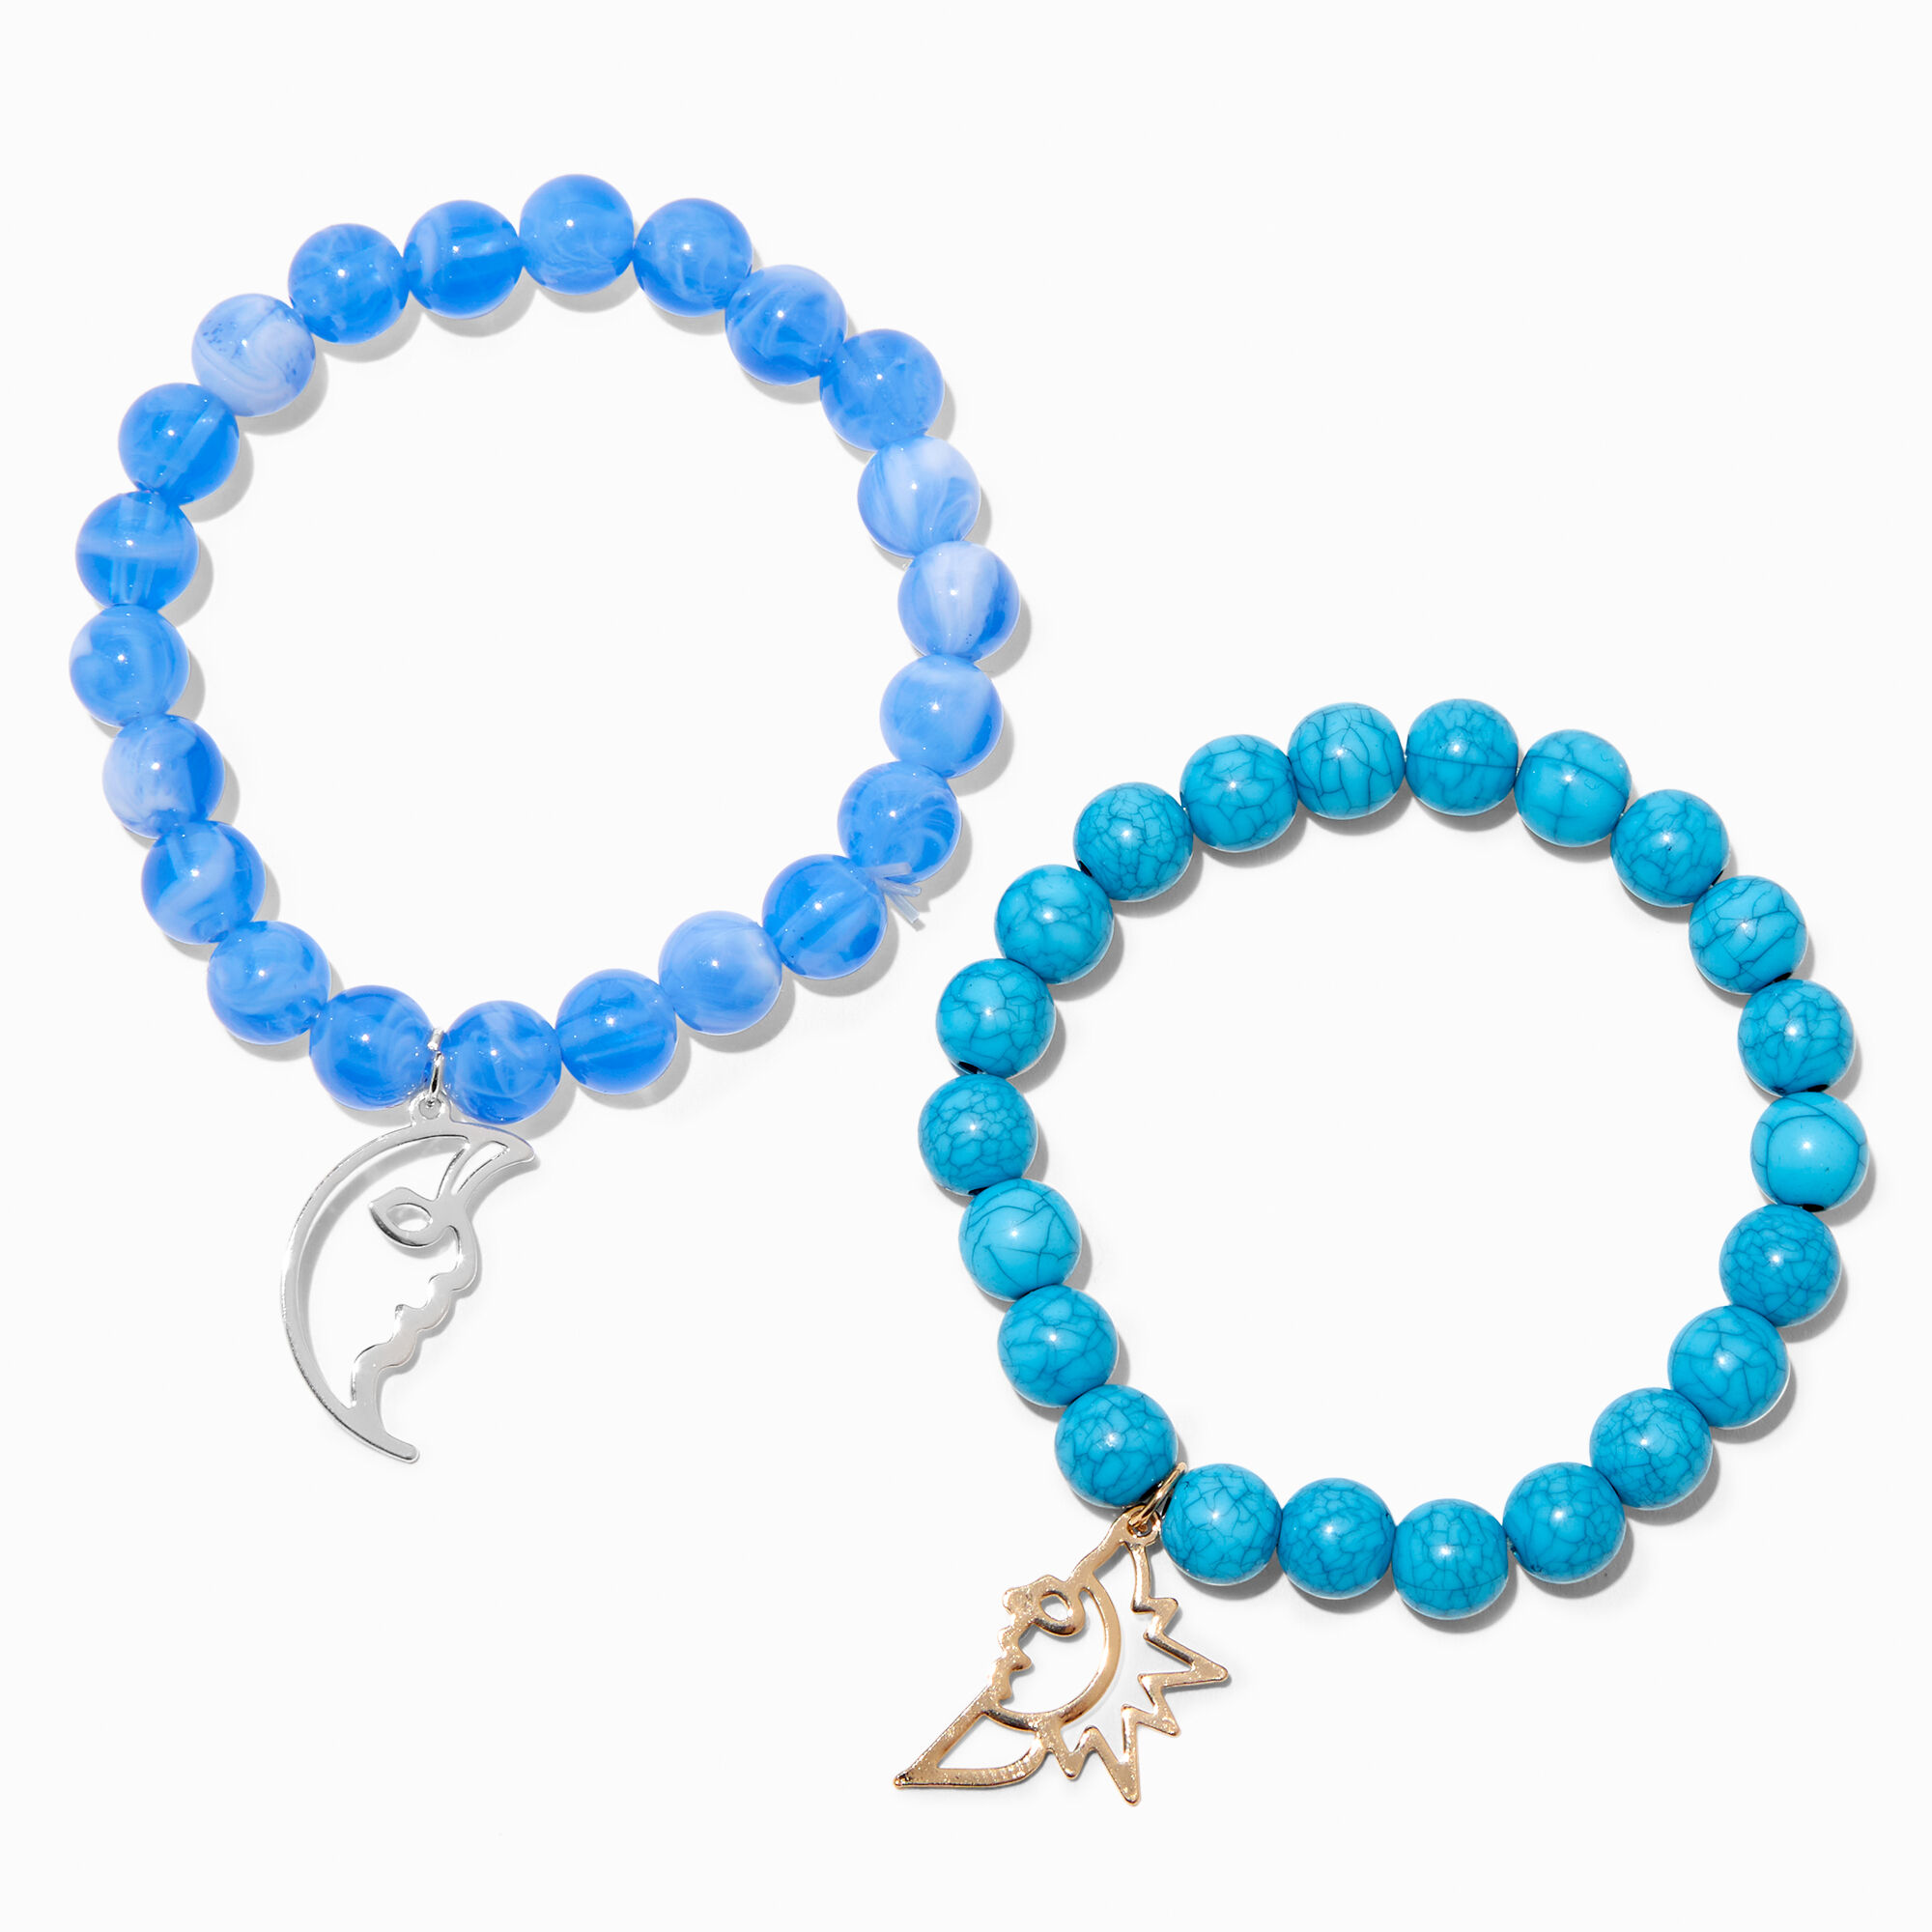 Claire's Glow in The Dark Fortune Stretch Bracelets - 2 Pack | Blue